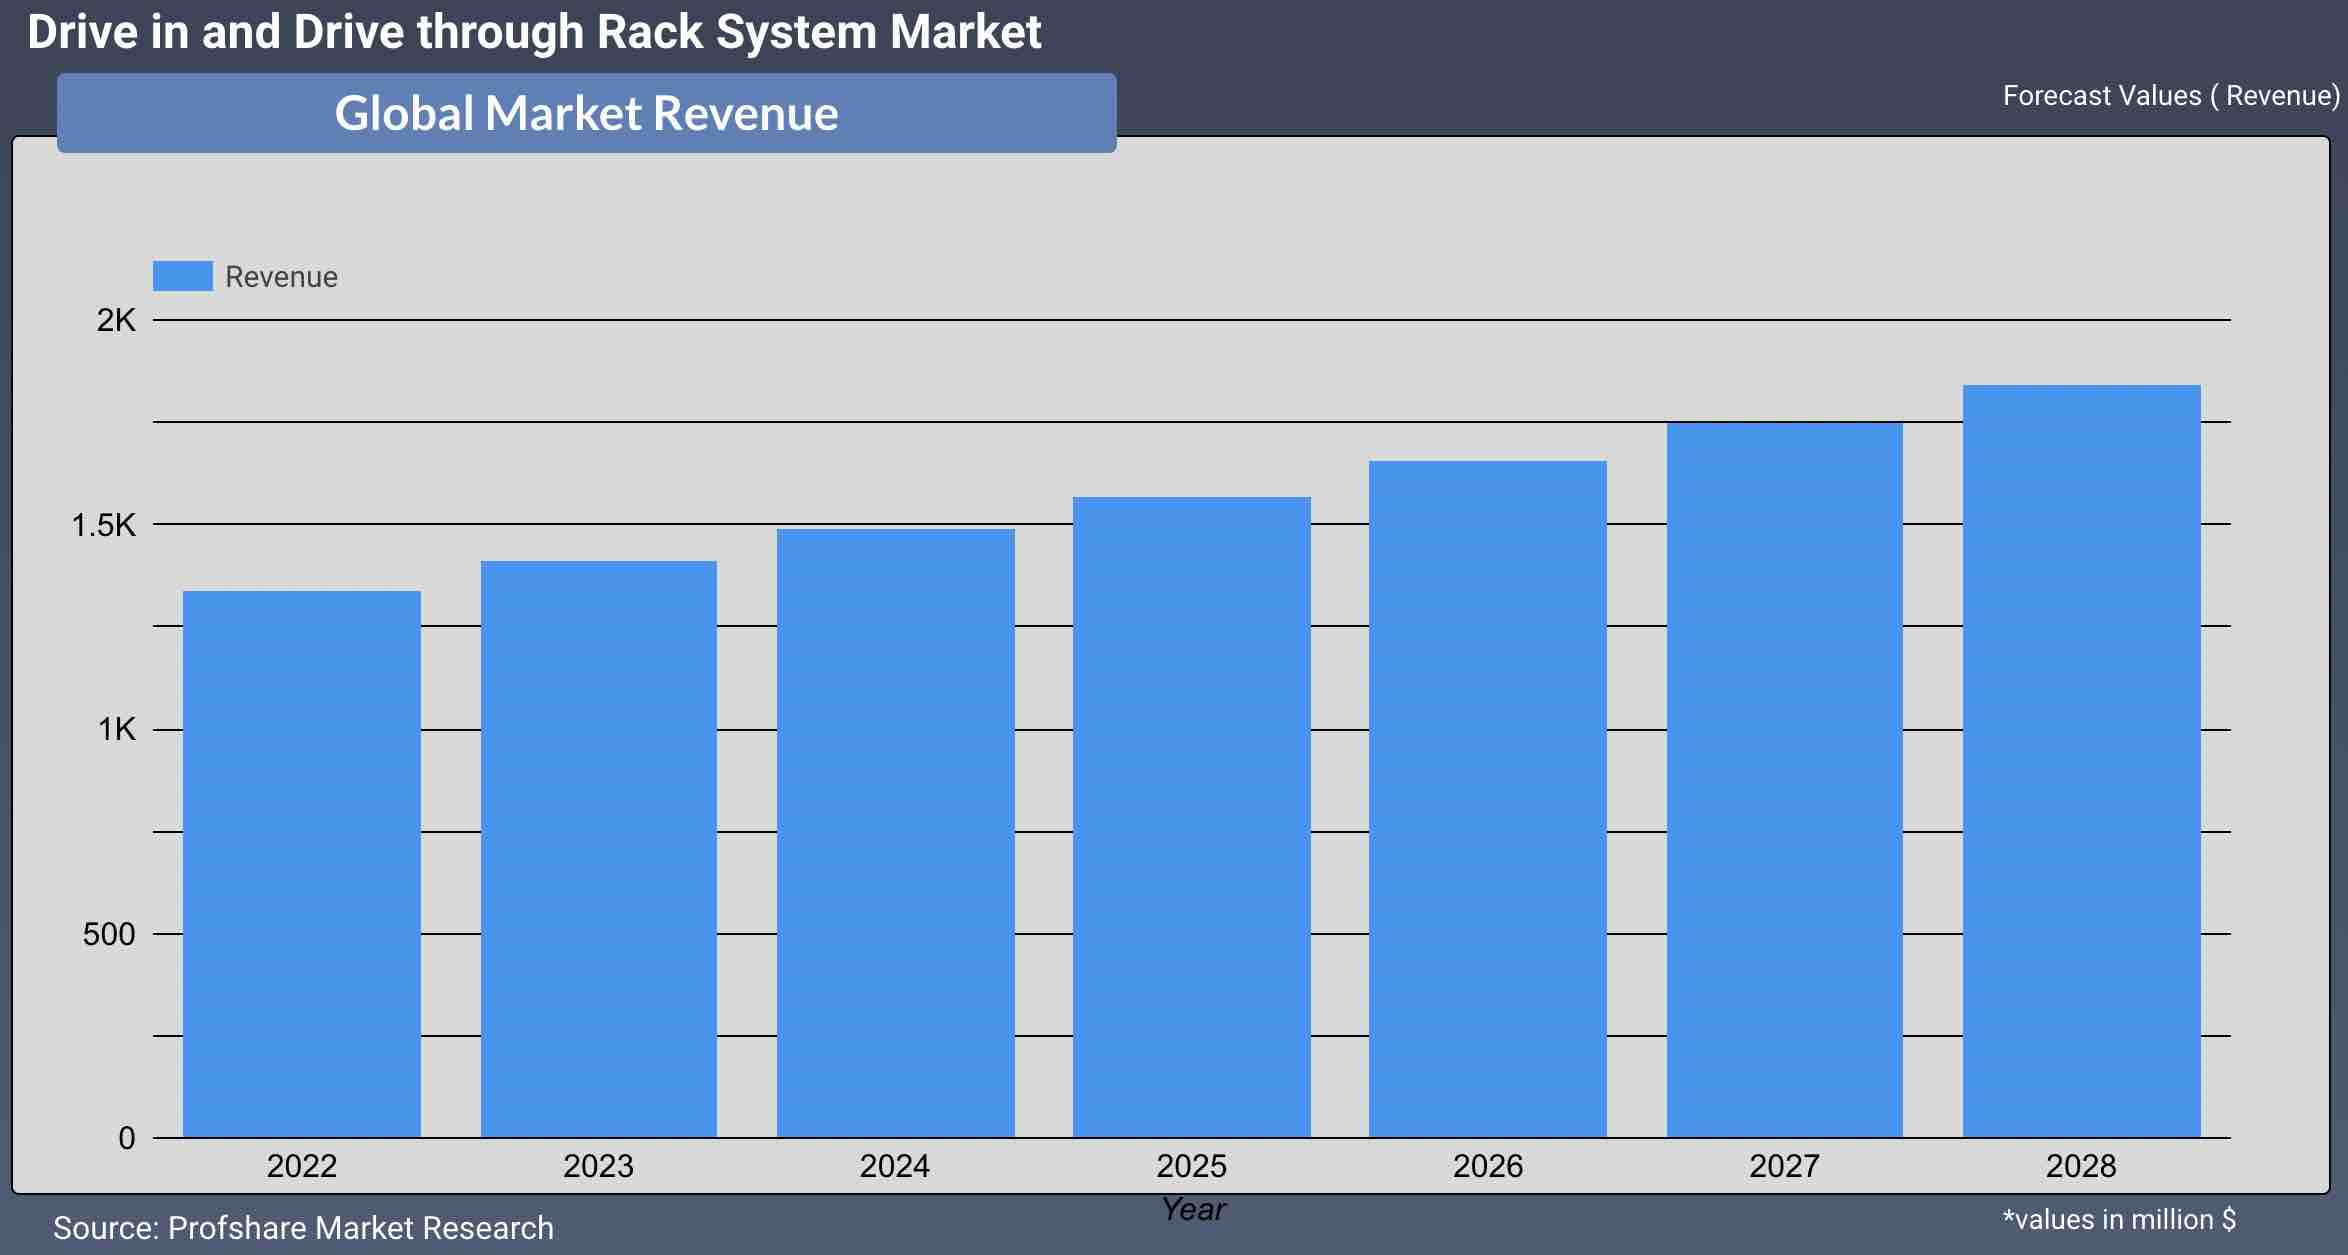 Drive in and Drive through Rack System Market